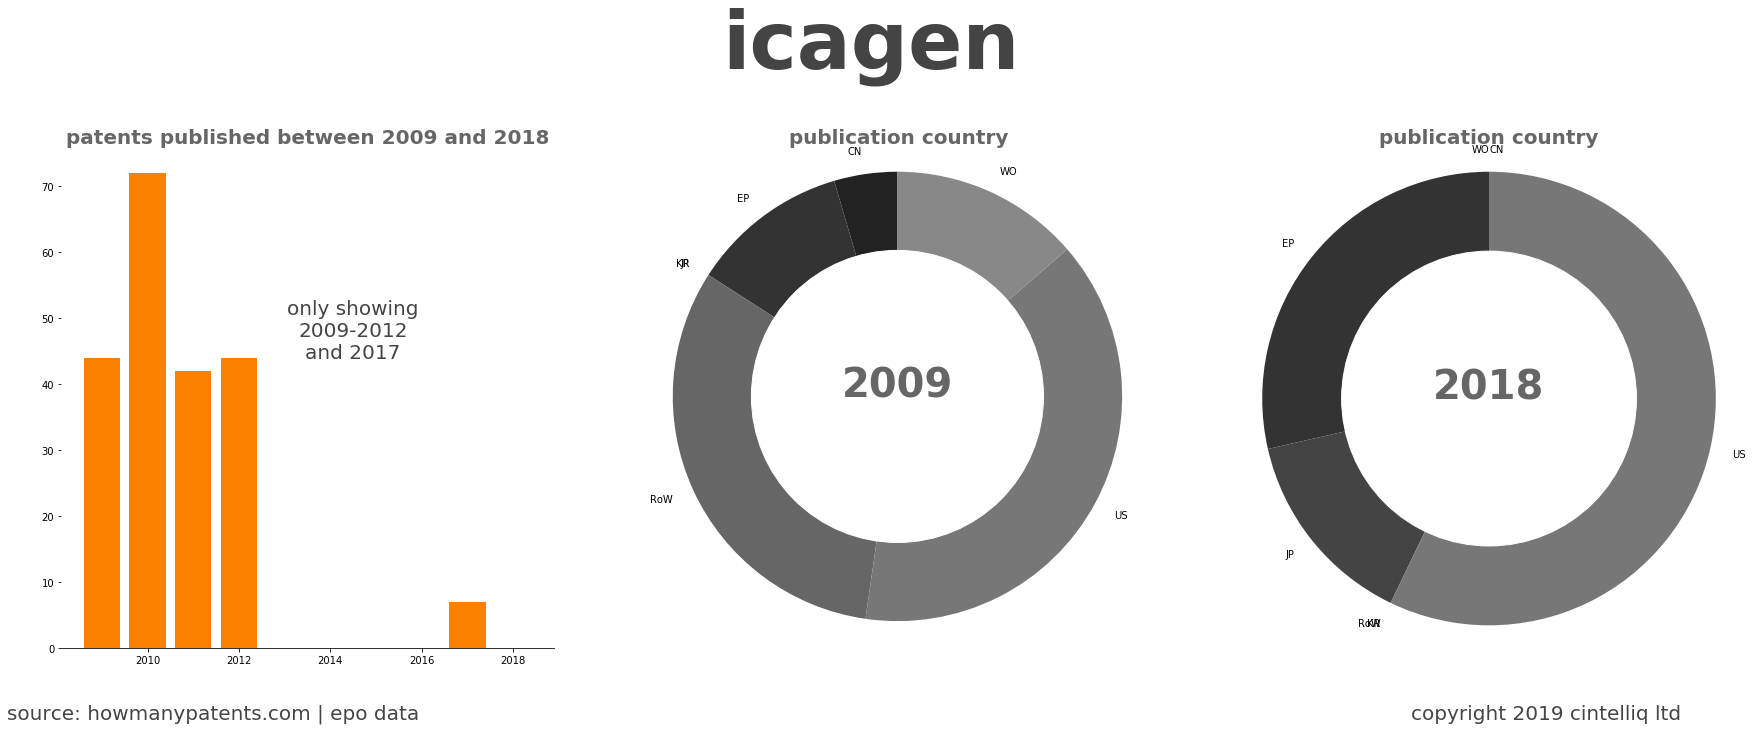 summary of patents for Icagen